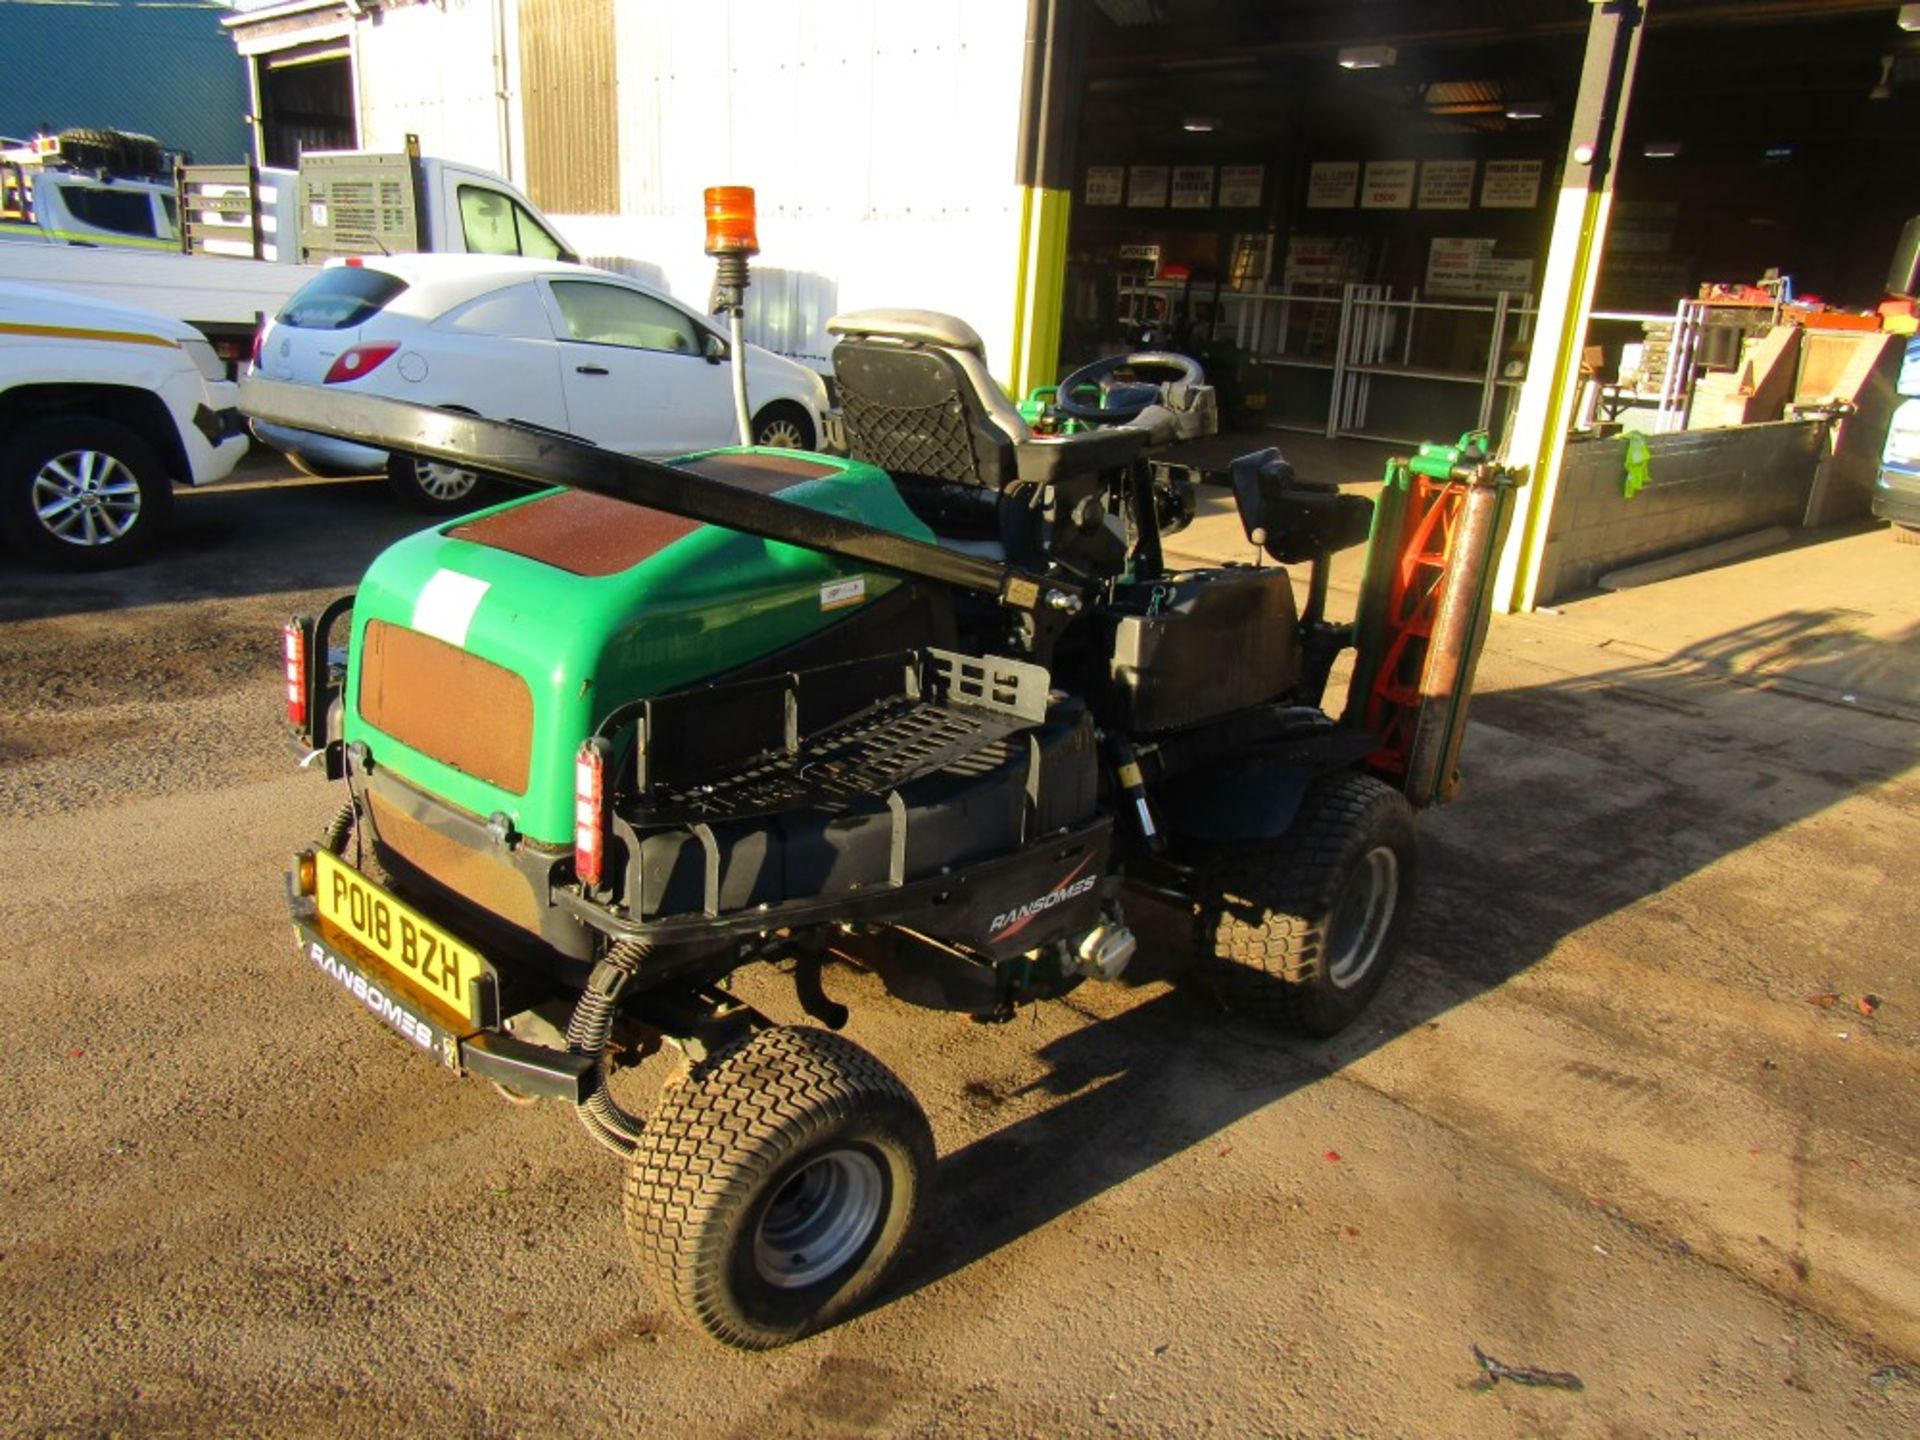 18 reg RANSOMES PARKWAY 3 TRIPLE RIDE ON MOWER (DIRECT COUNCIL) 1ST REG 05/18, 224 HOURS - Image 4 of 6